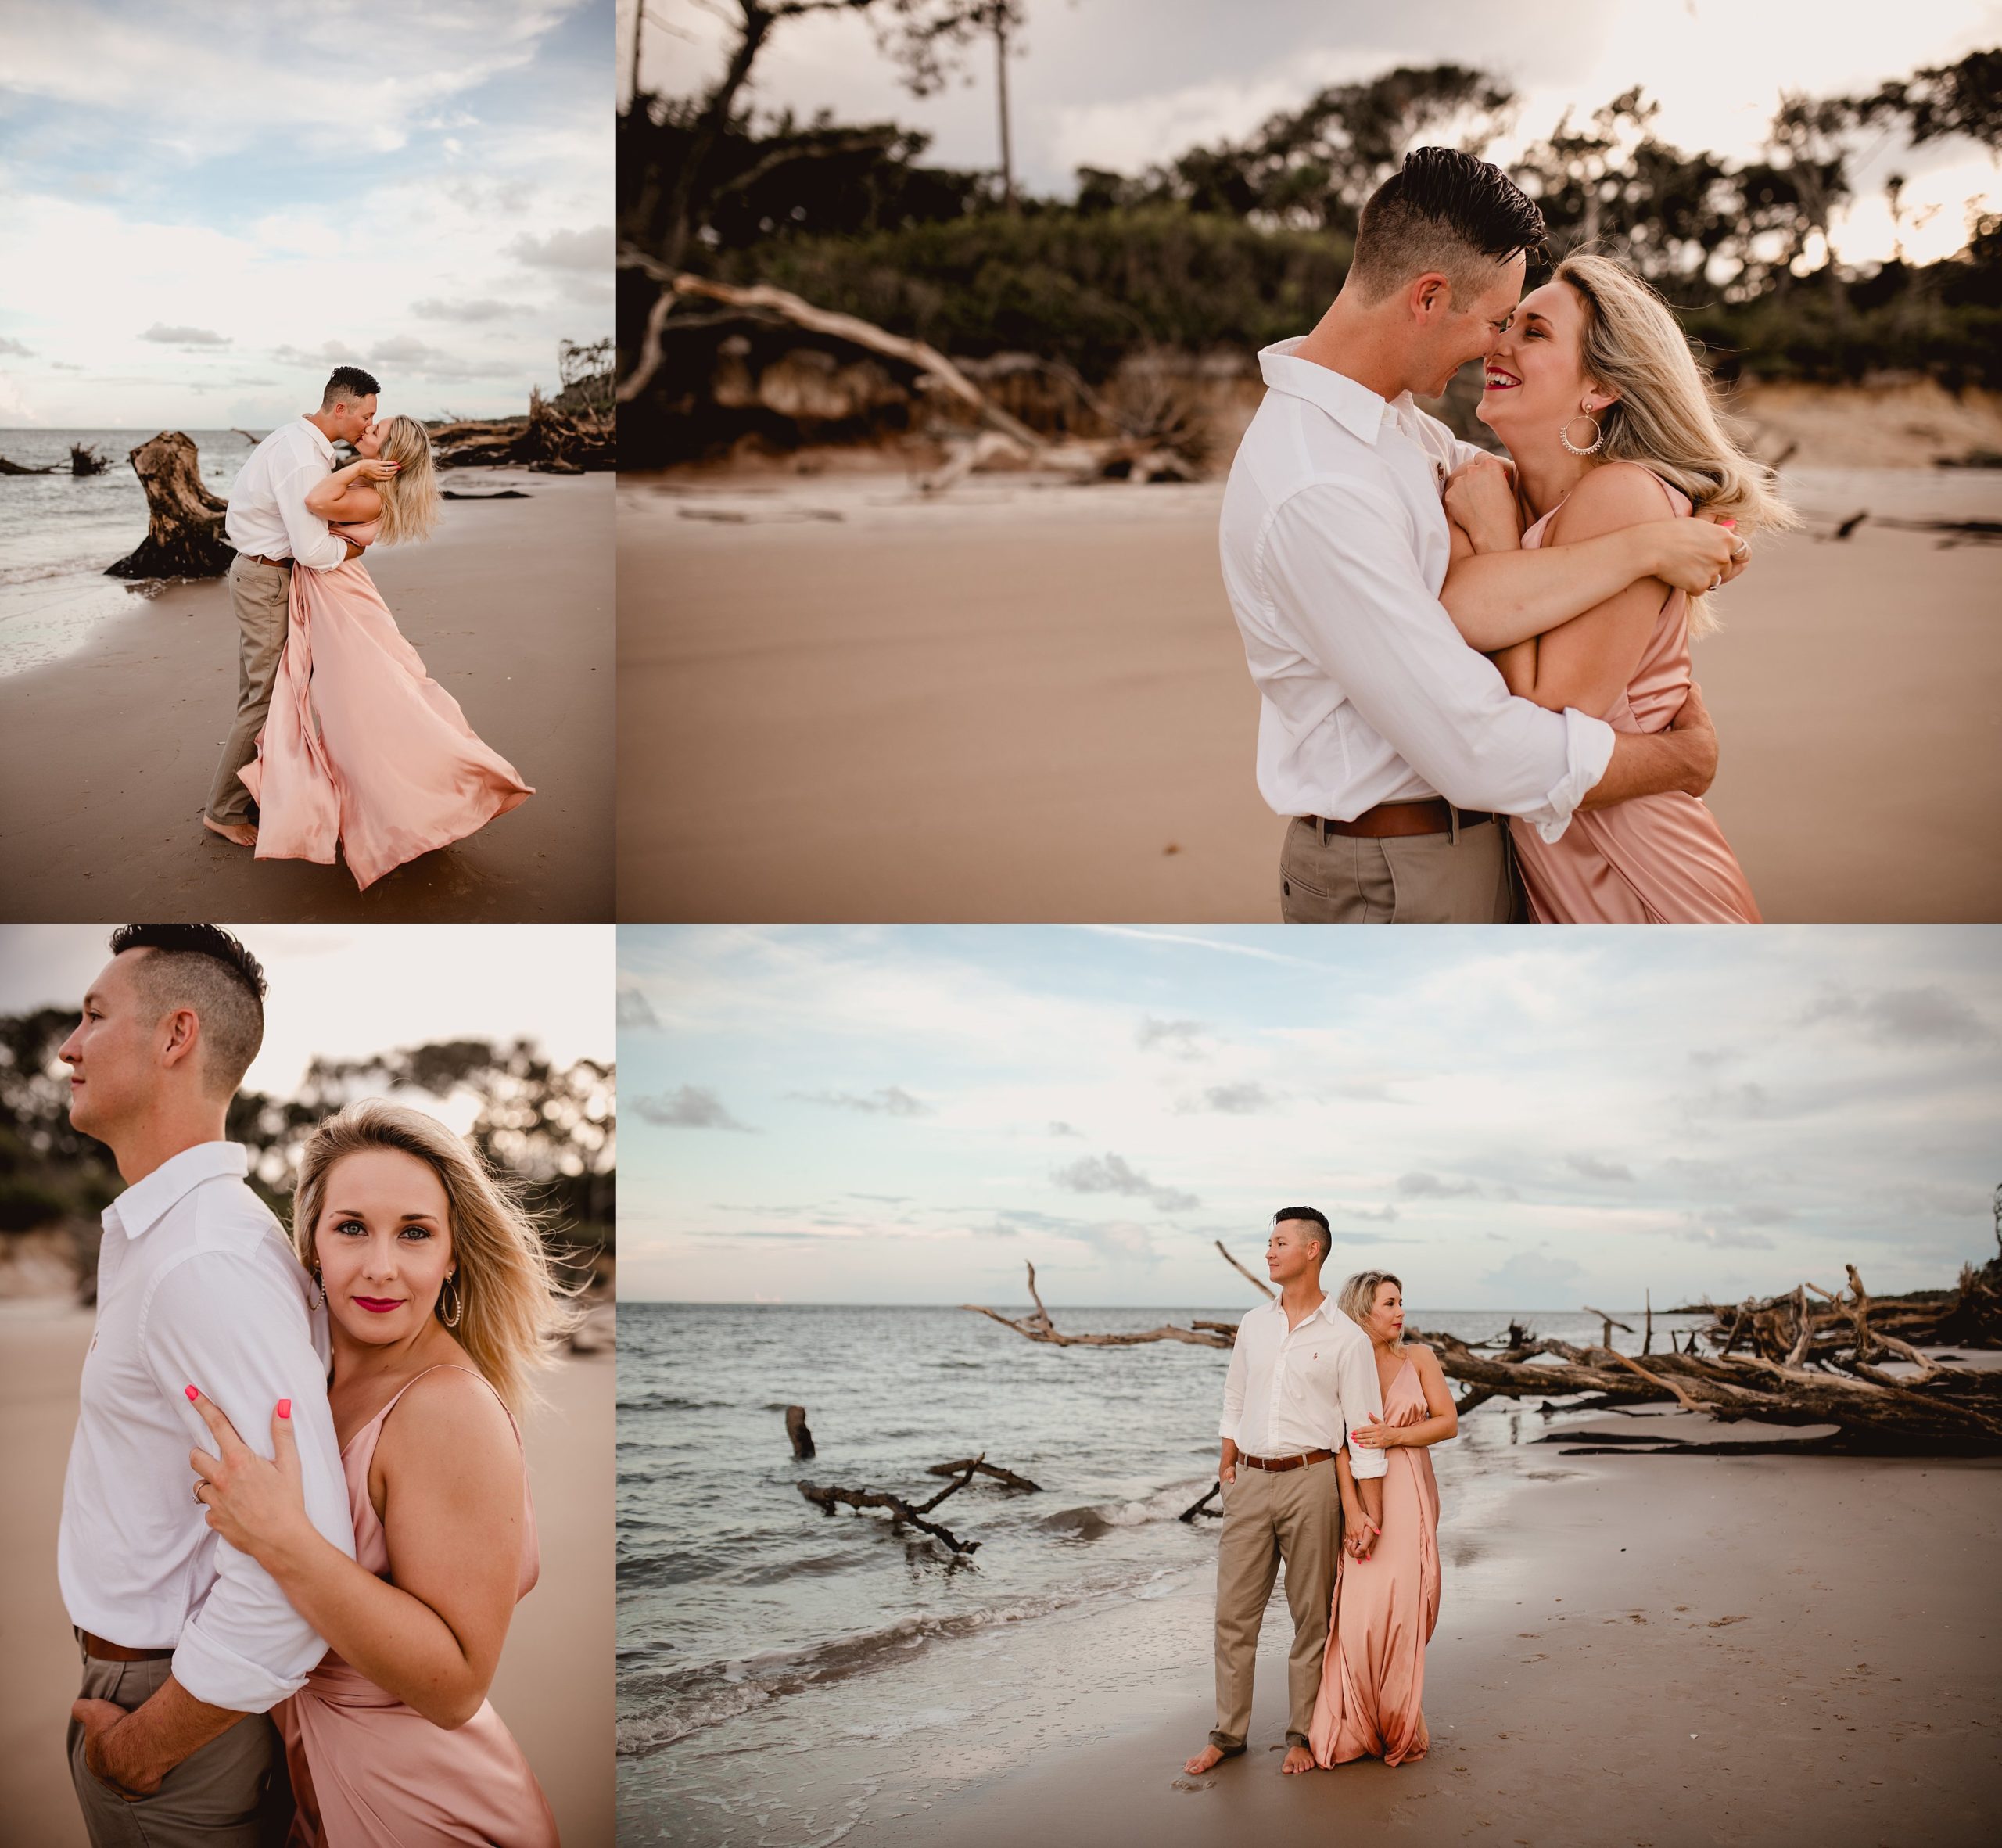 Fun couples photography on the beach in Florida.